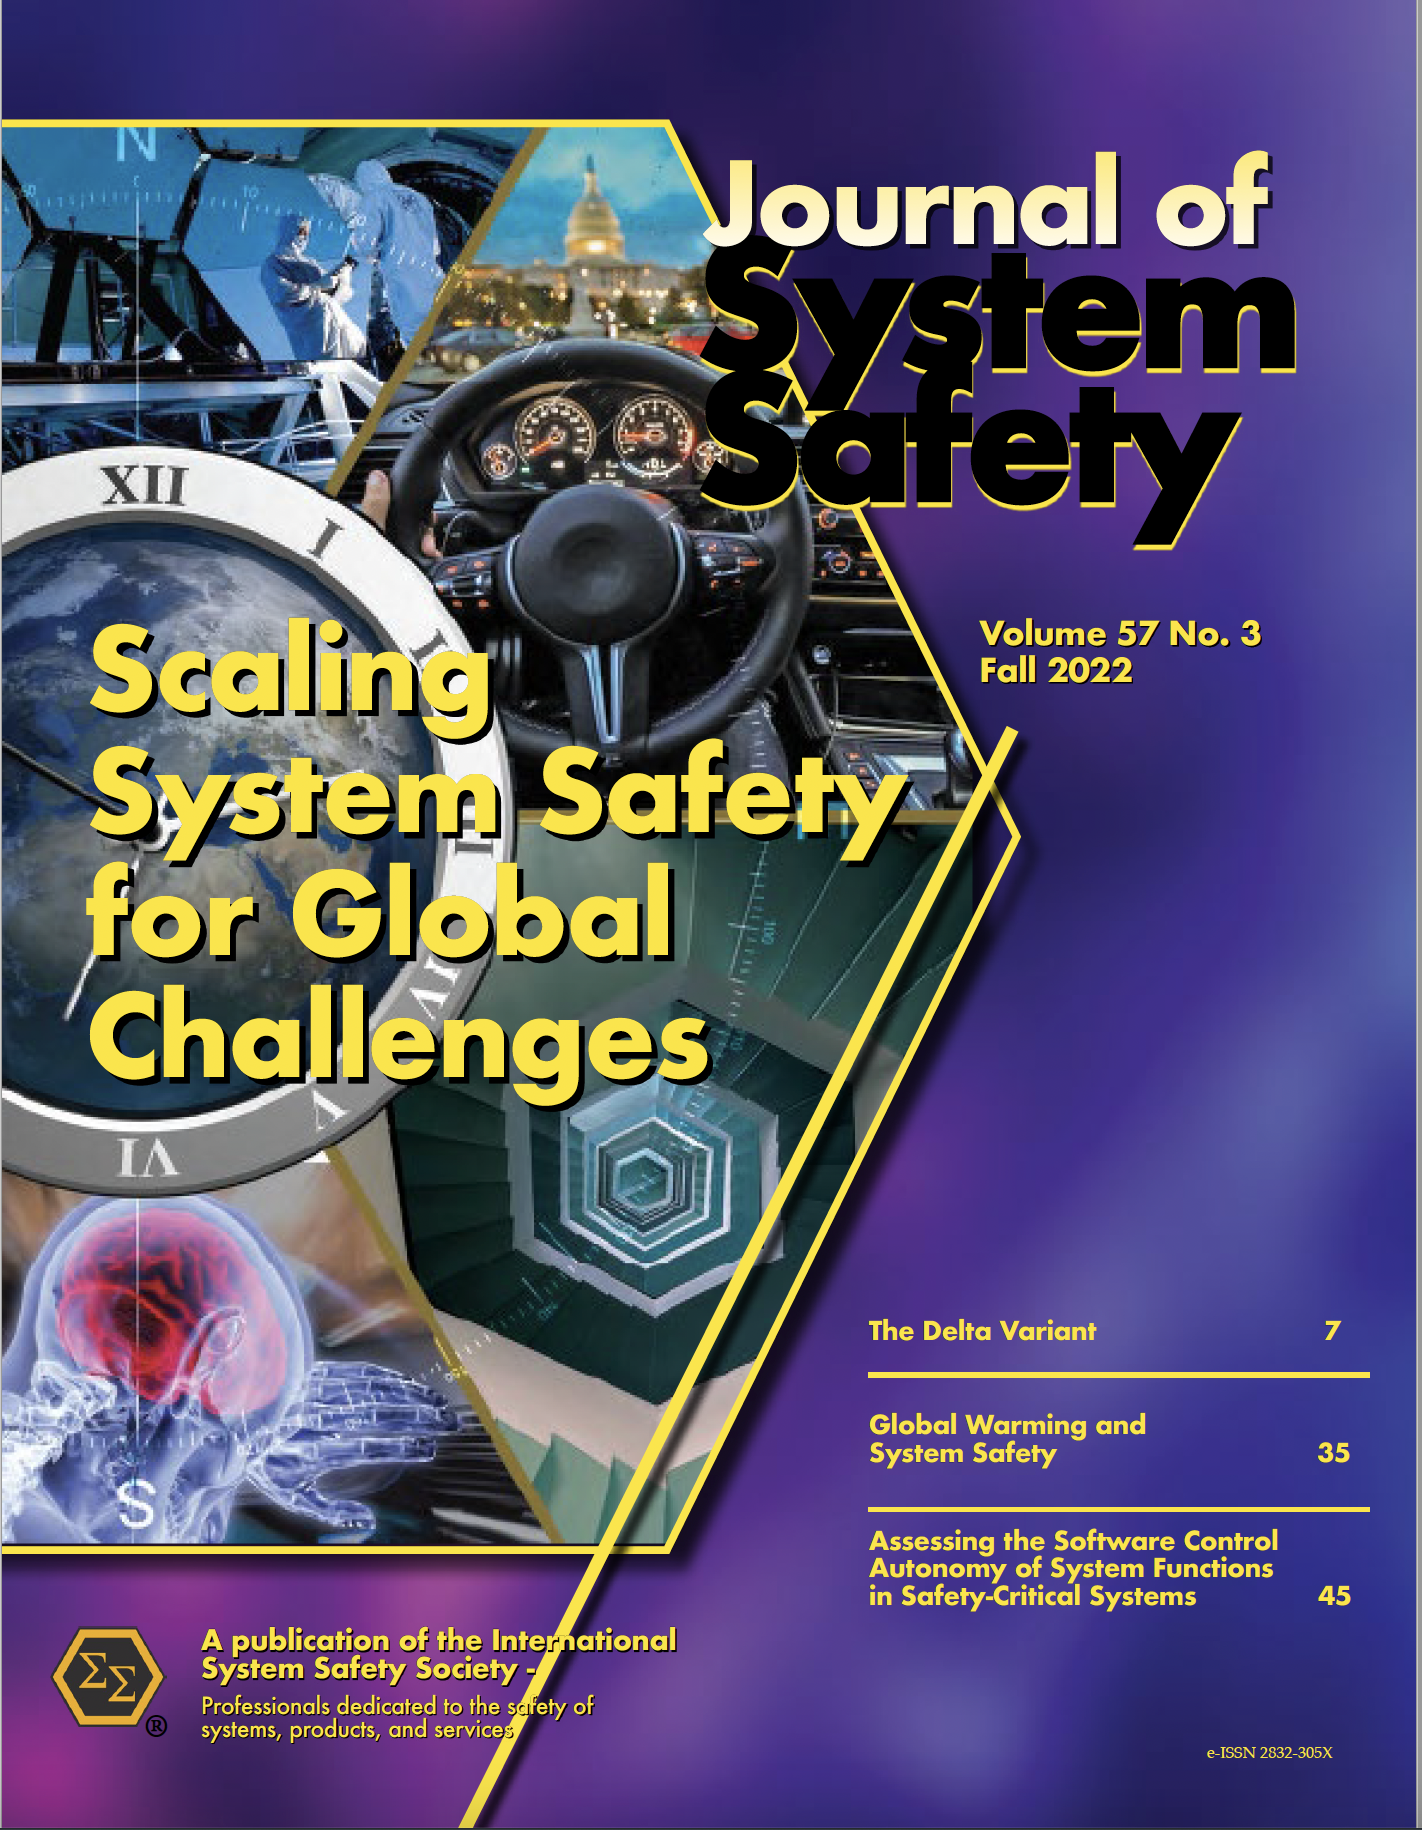 Journal of System Safety, Fall 2022